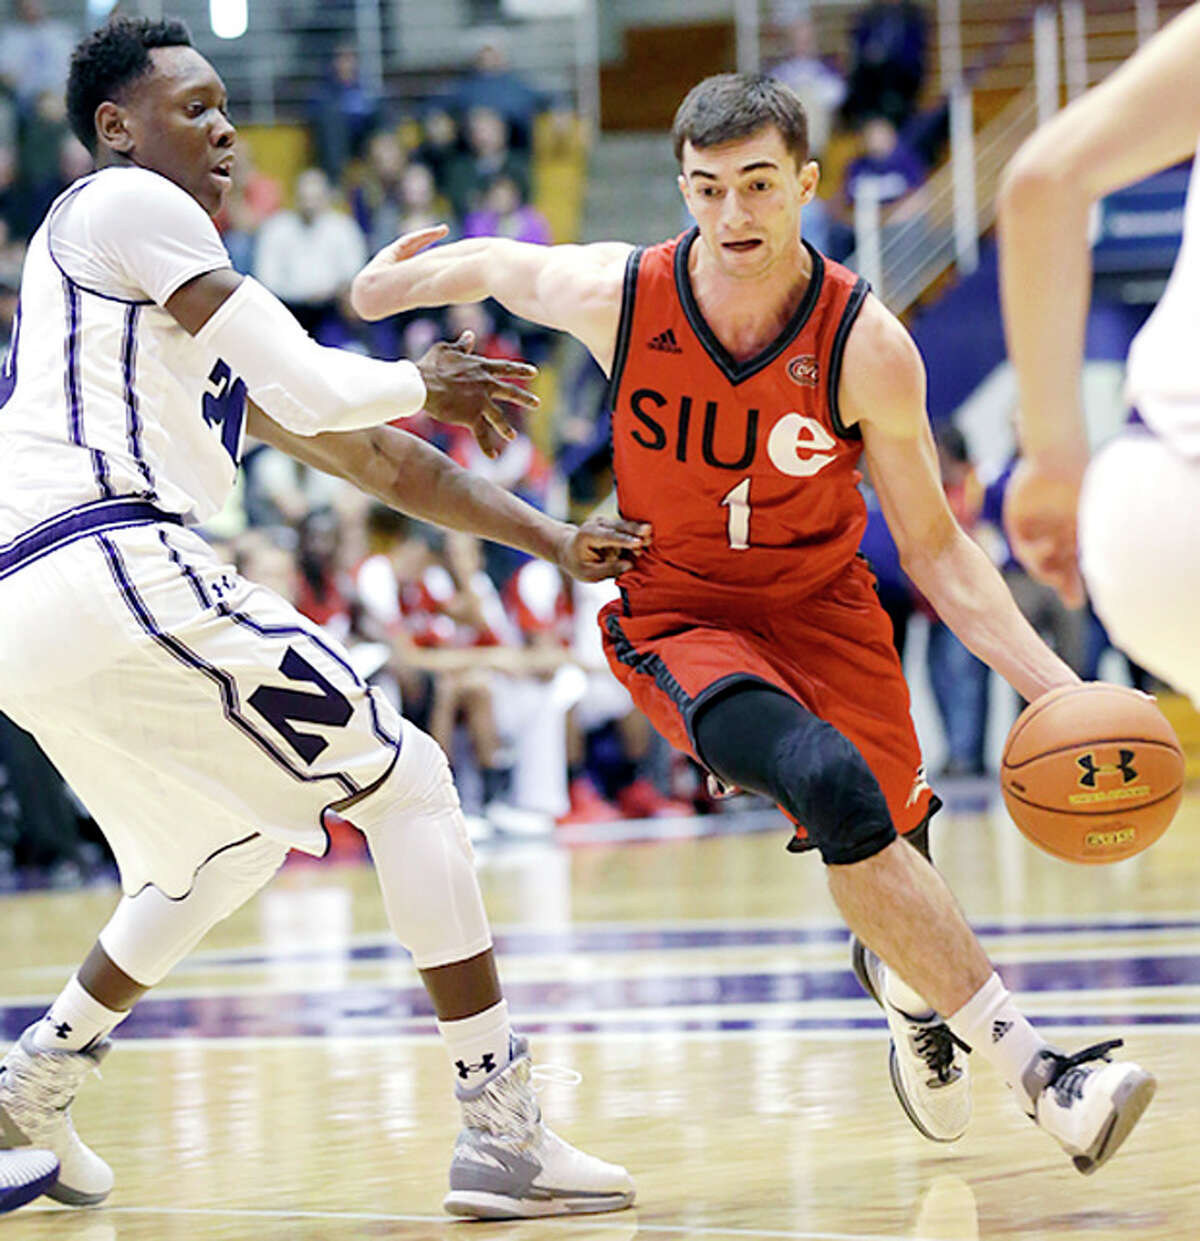 SIU - Edwardsville guard Burak Eslik, right, drives against Northwestern's Scottie Lindsey during the first half of an NCAA college basketball game on Saturday, Dec. 5, 2015, in Evanston, Ill. (AP Photo/Nam Y. Huh)